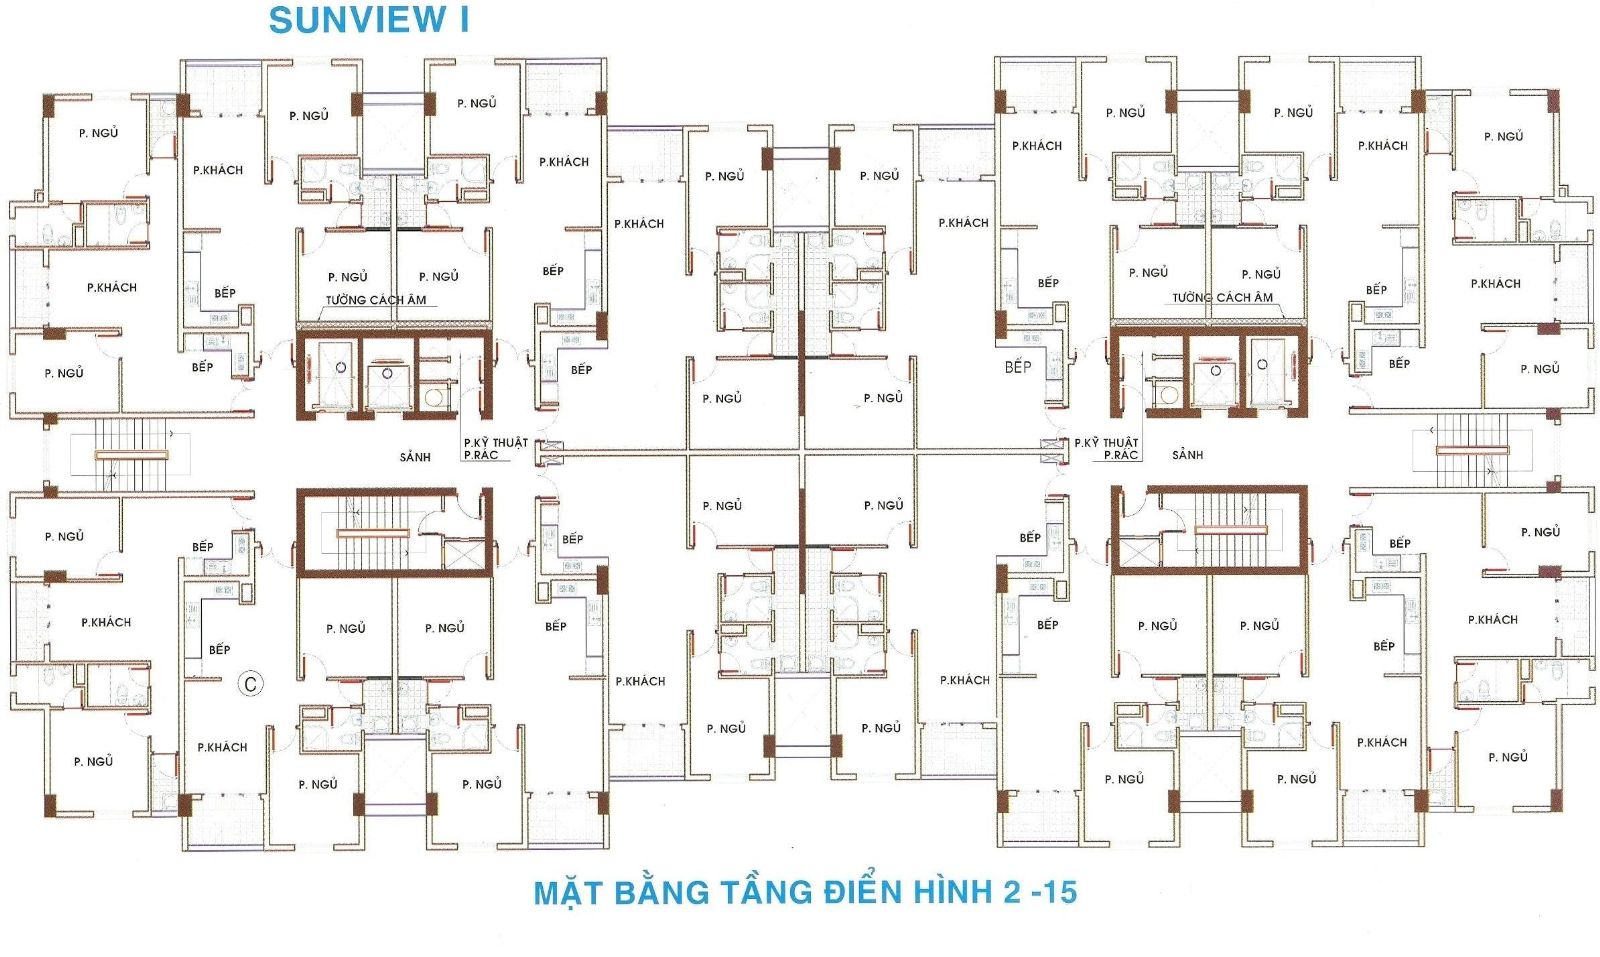 Hạ tầng, quy hoạch của Sunview | 1